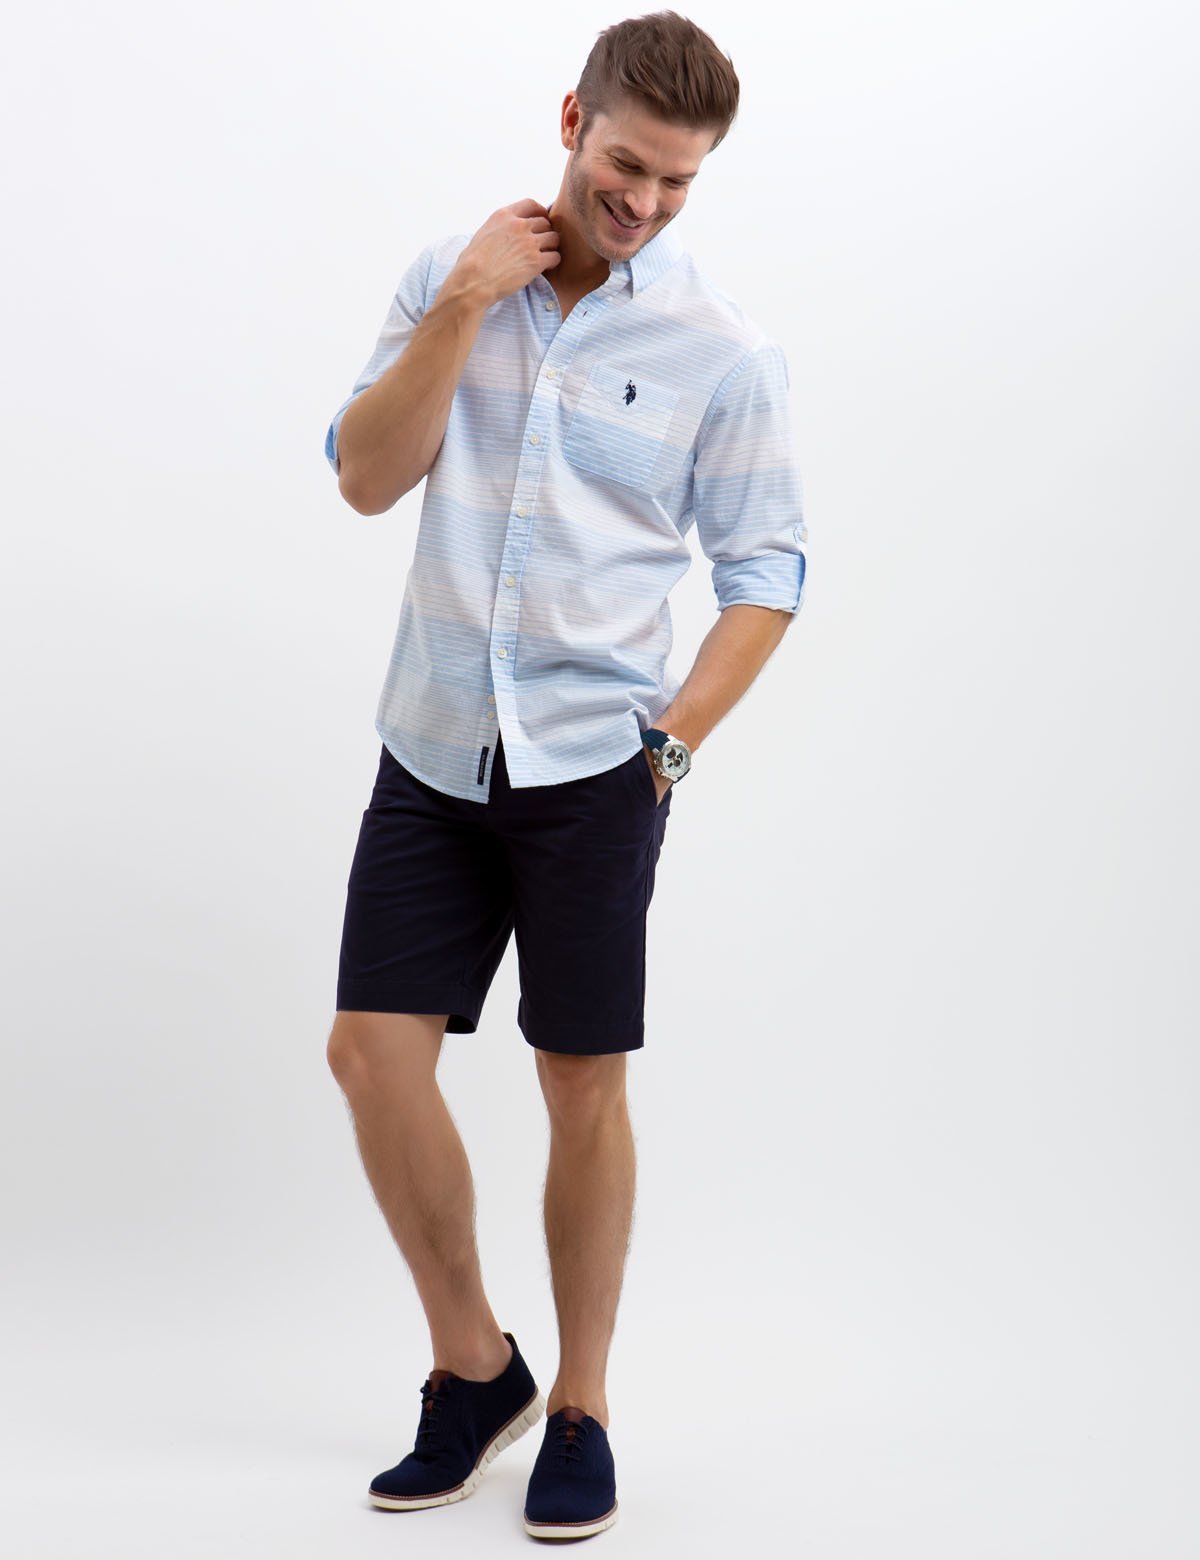 polo shorts outfit